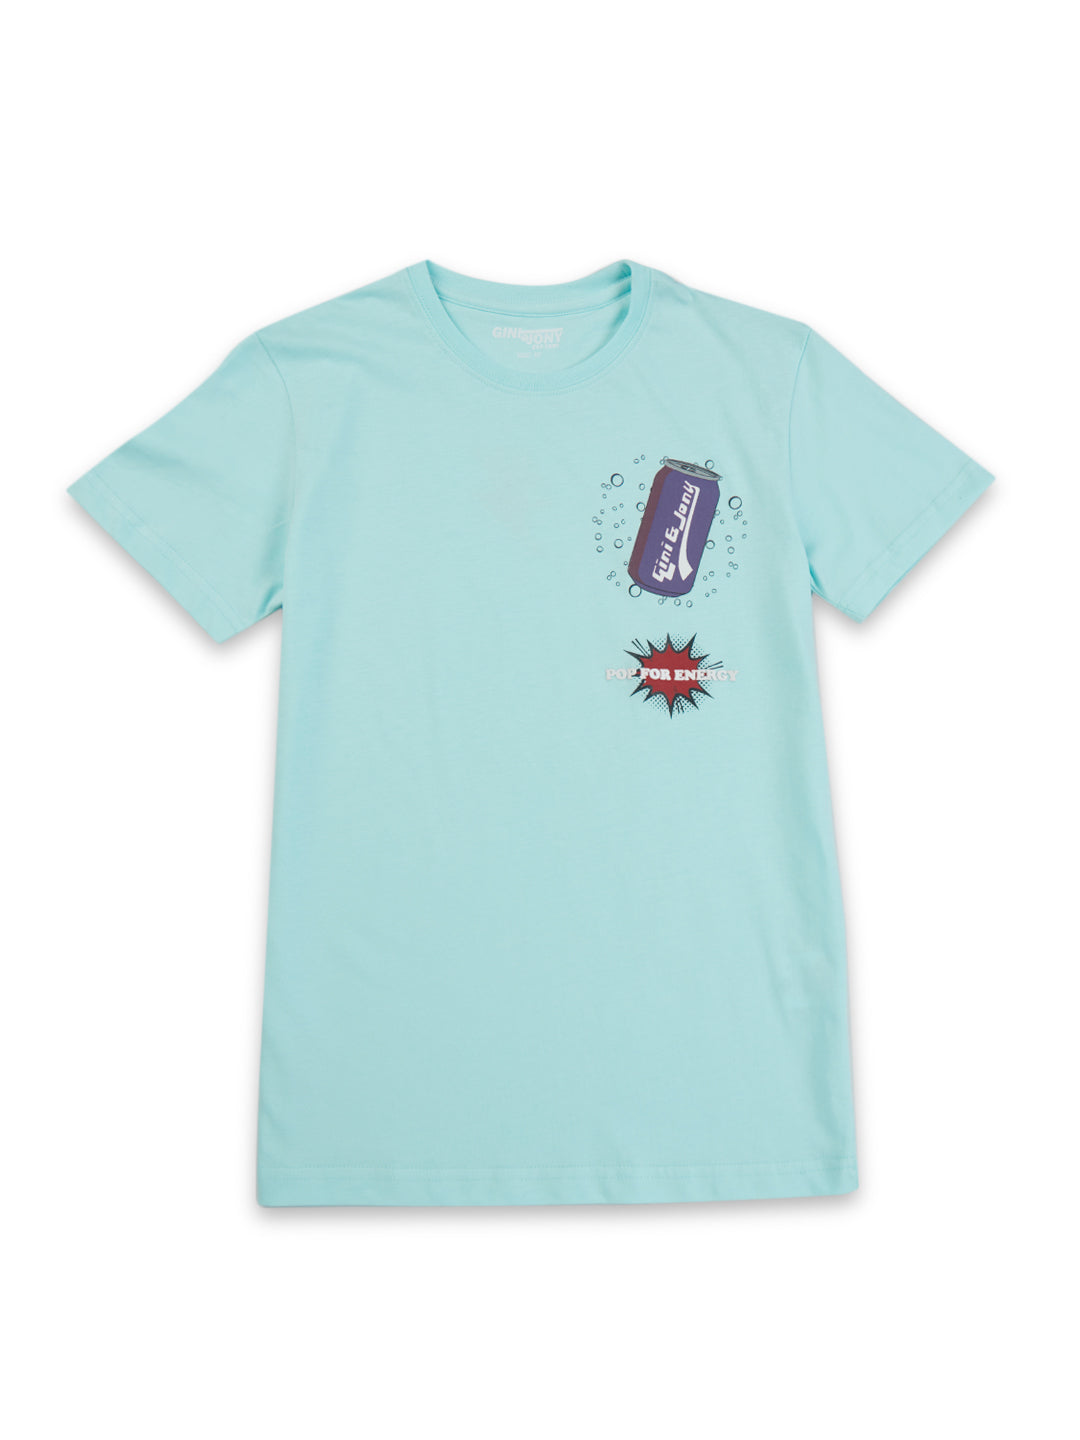 Boys Turquoise Cotton Solid T-Shirt